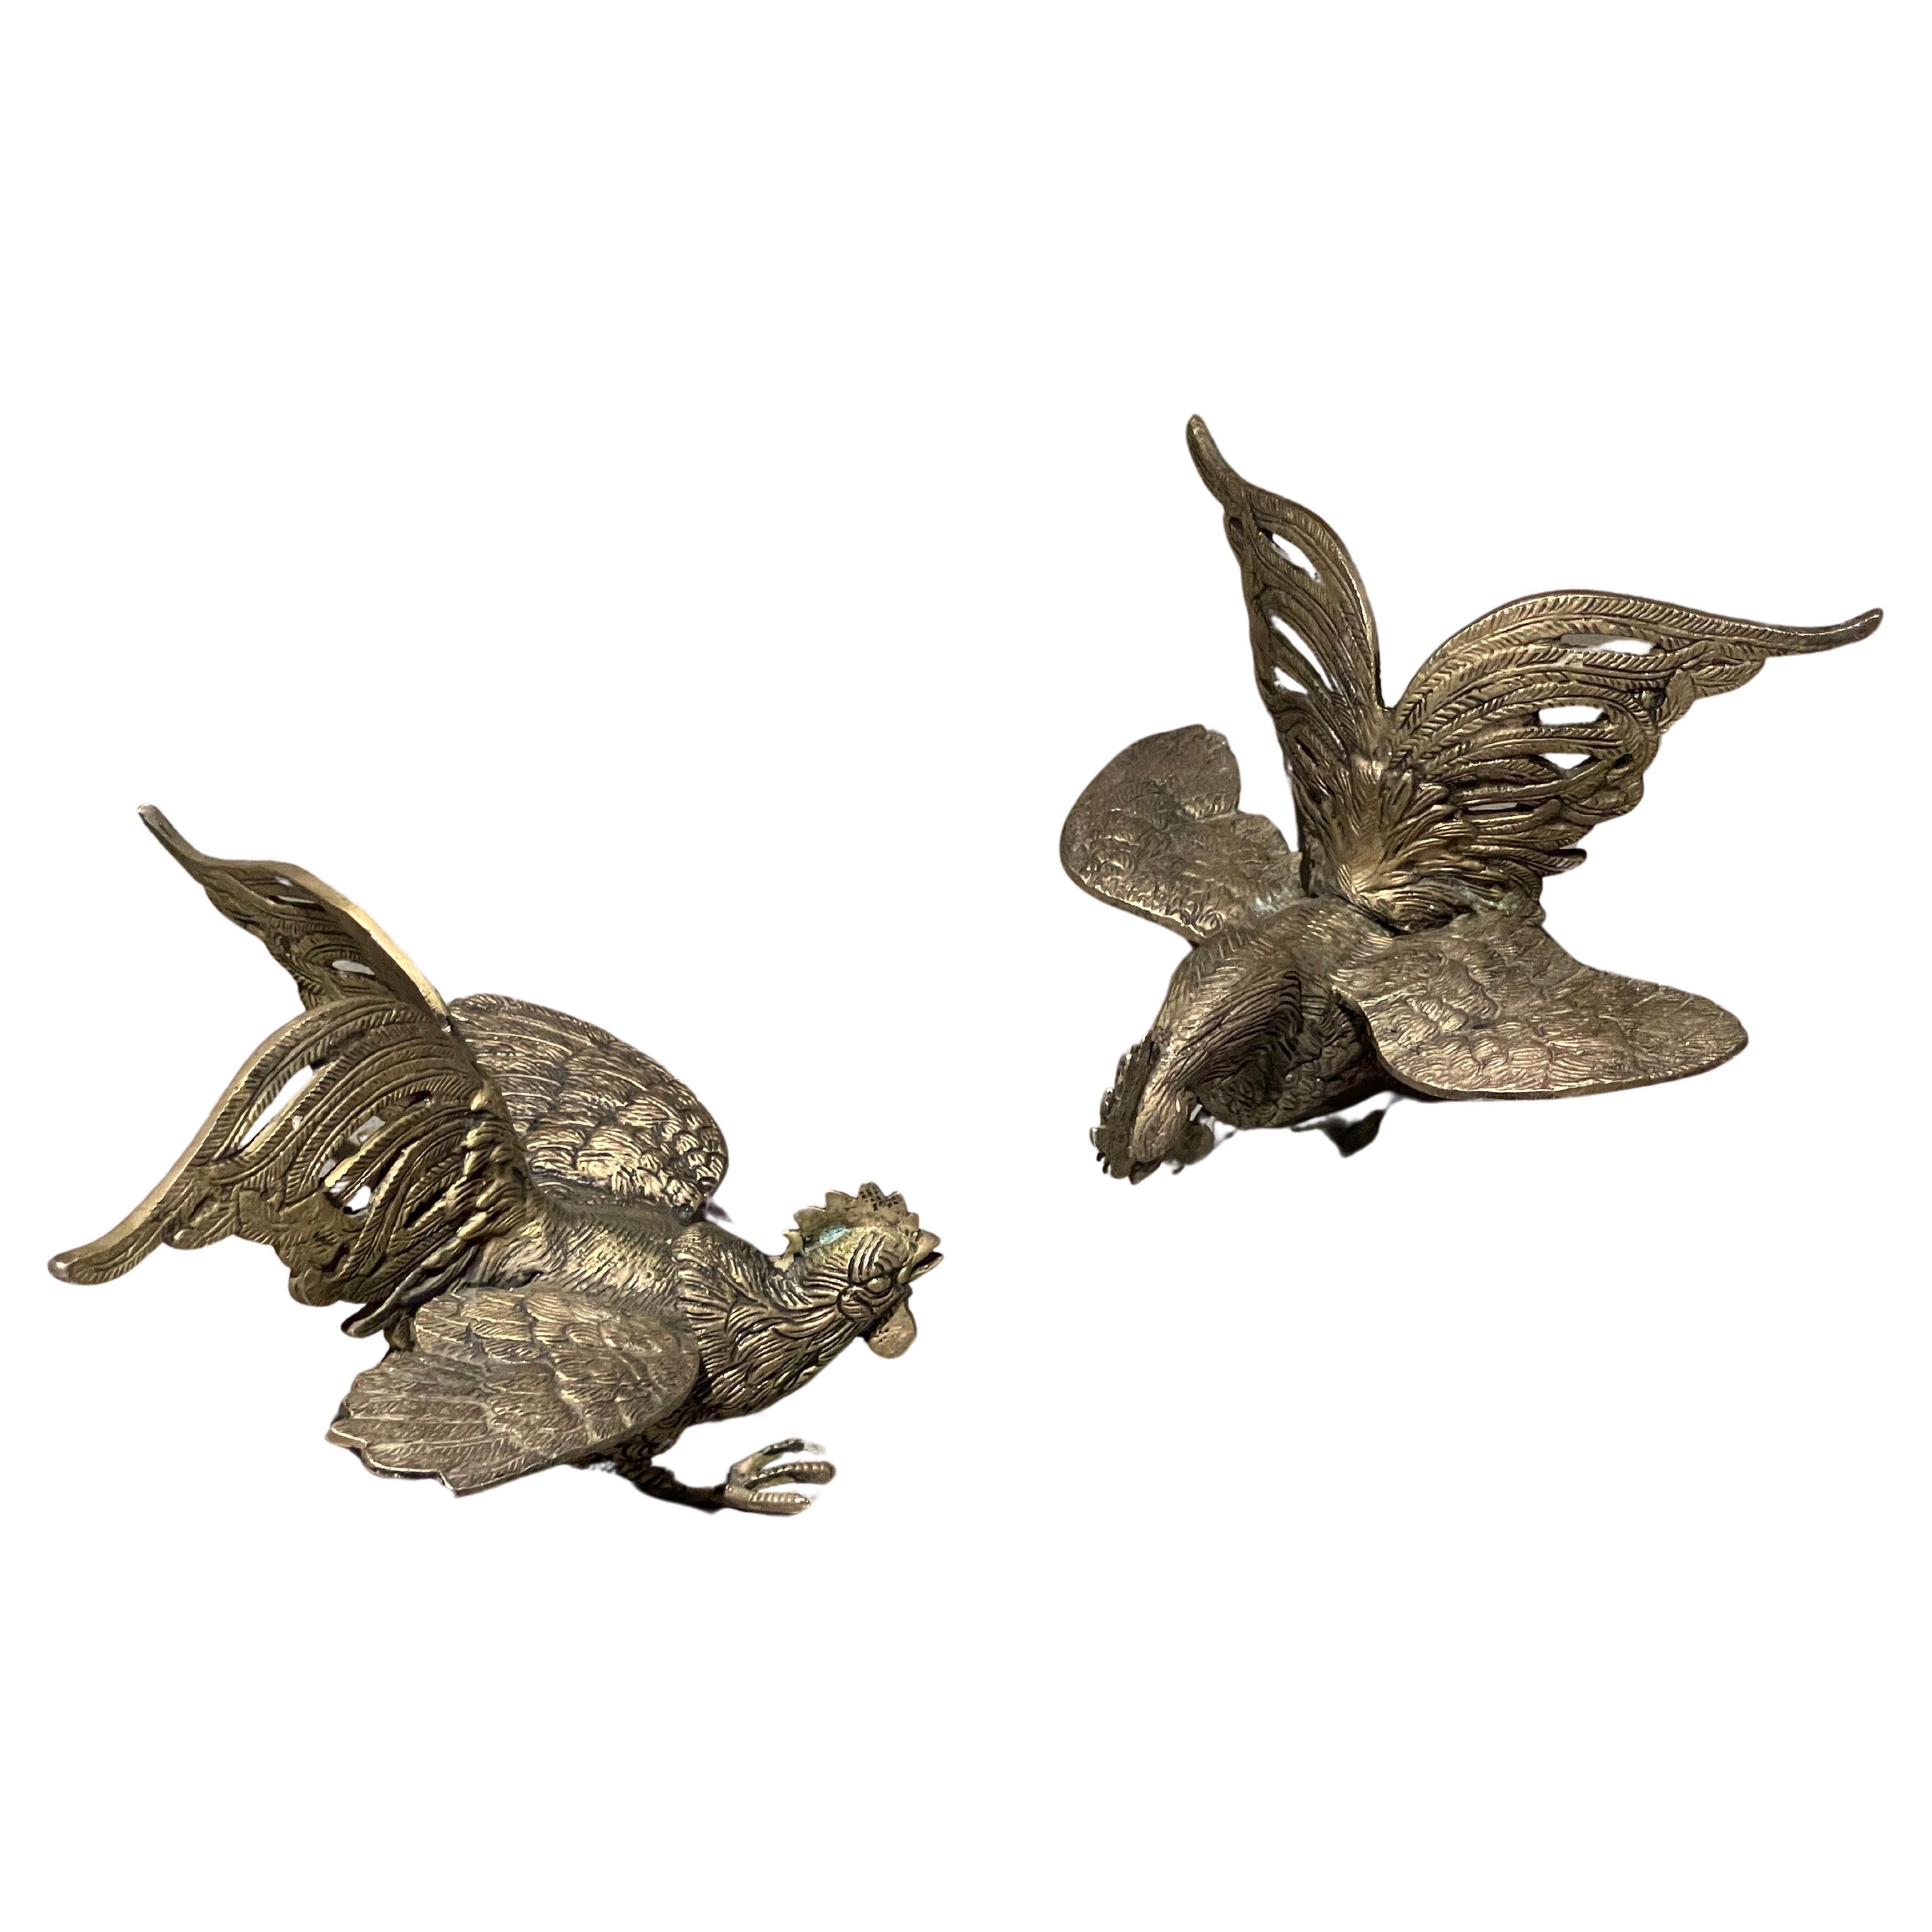 A Pair of Artistically created birds for table decor, silver-plated roosters - ideal for a coffee table or bookends. These figures are Classic Hollywood Regency! They are each unique from one another, with slightly different positions and physical